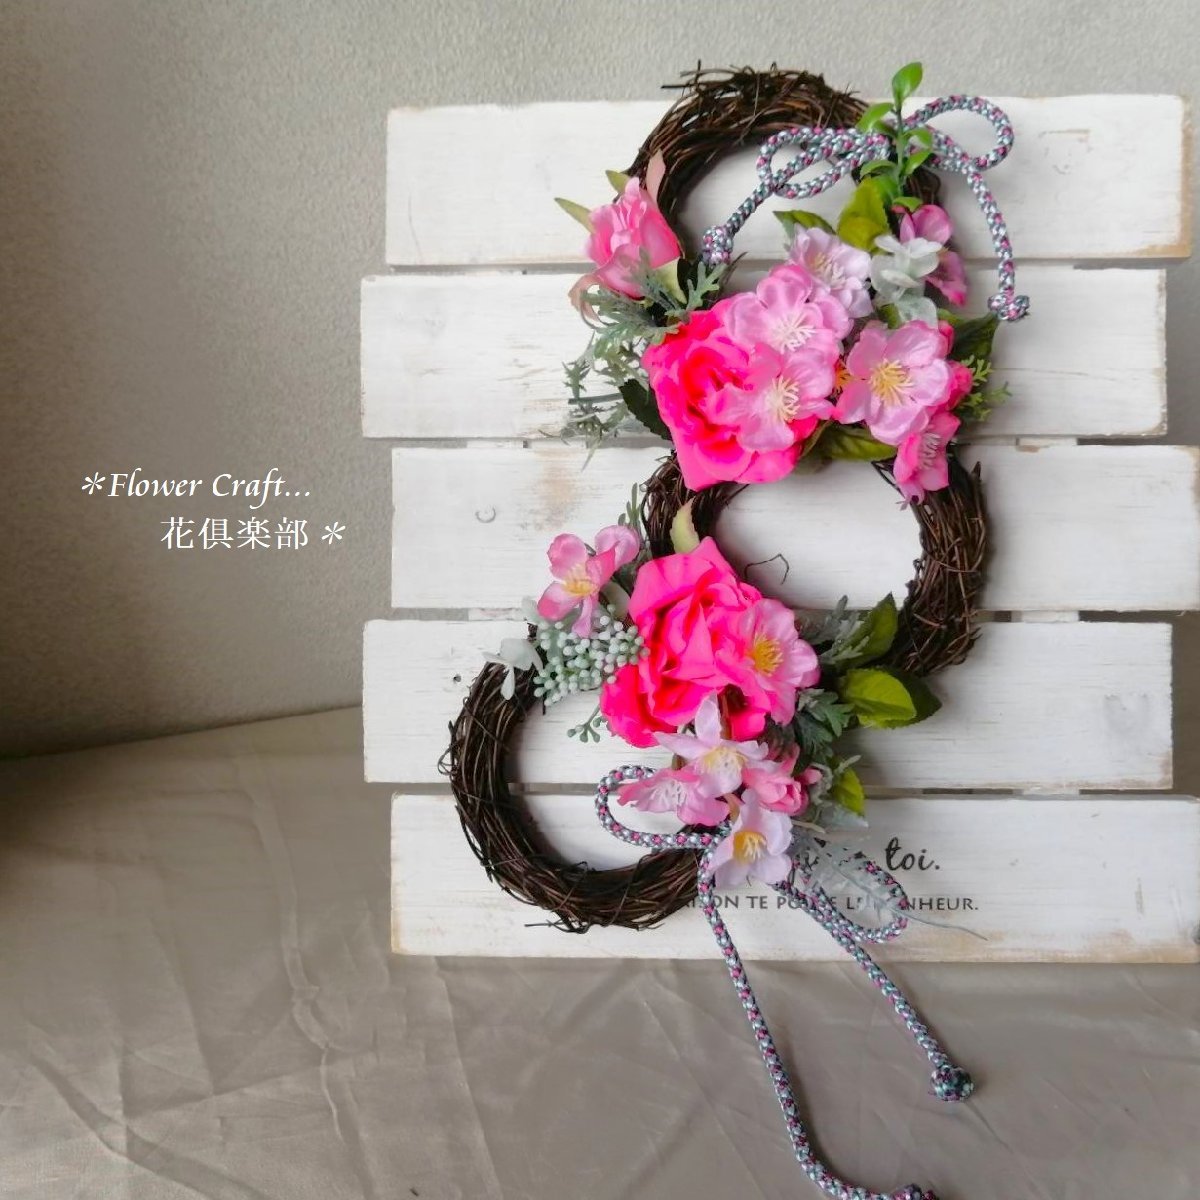  interior * gift *. house .. flower see * Sakura. lease [I] lease ornament artificial flower gift entranceway new building festival . marriage festival .